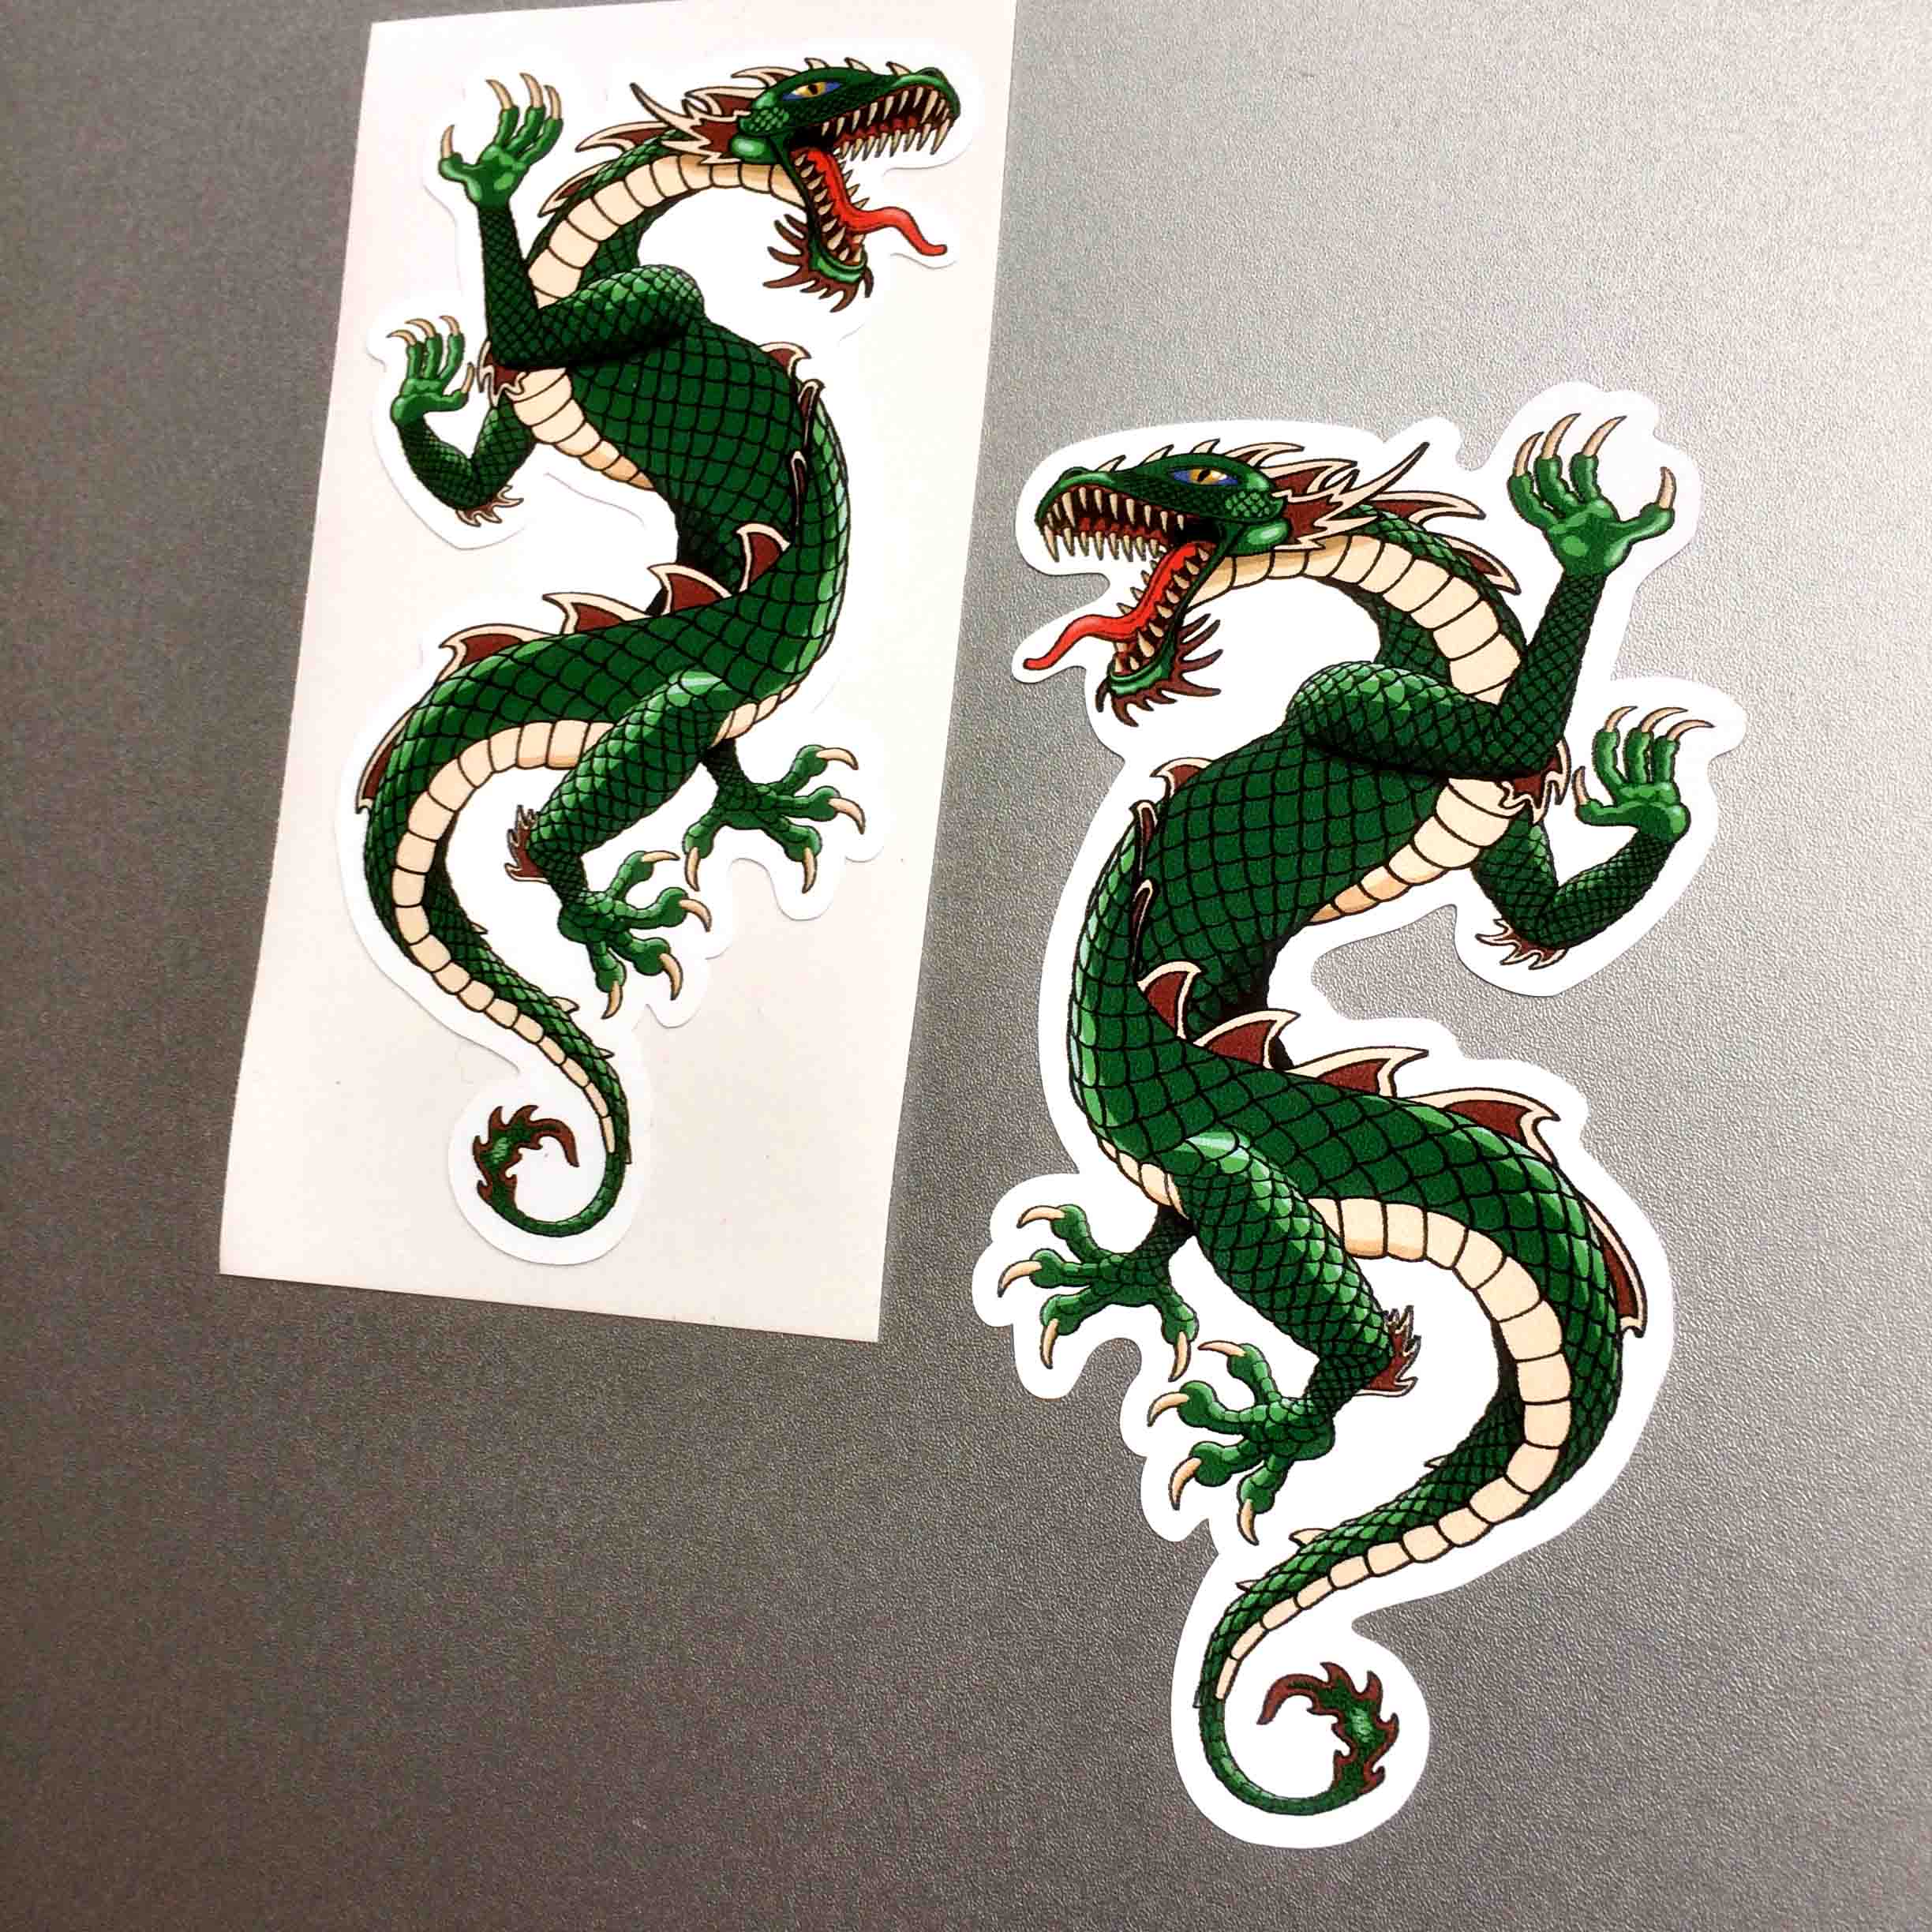 DRAGON STICKERS. A four legged green dragon with scaly skin, a tail and jaws wide open displaying a red tongue and sharp teeth.